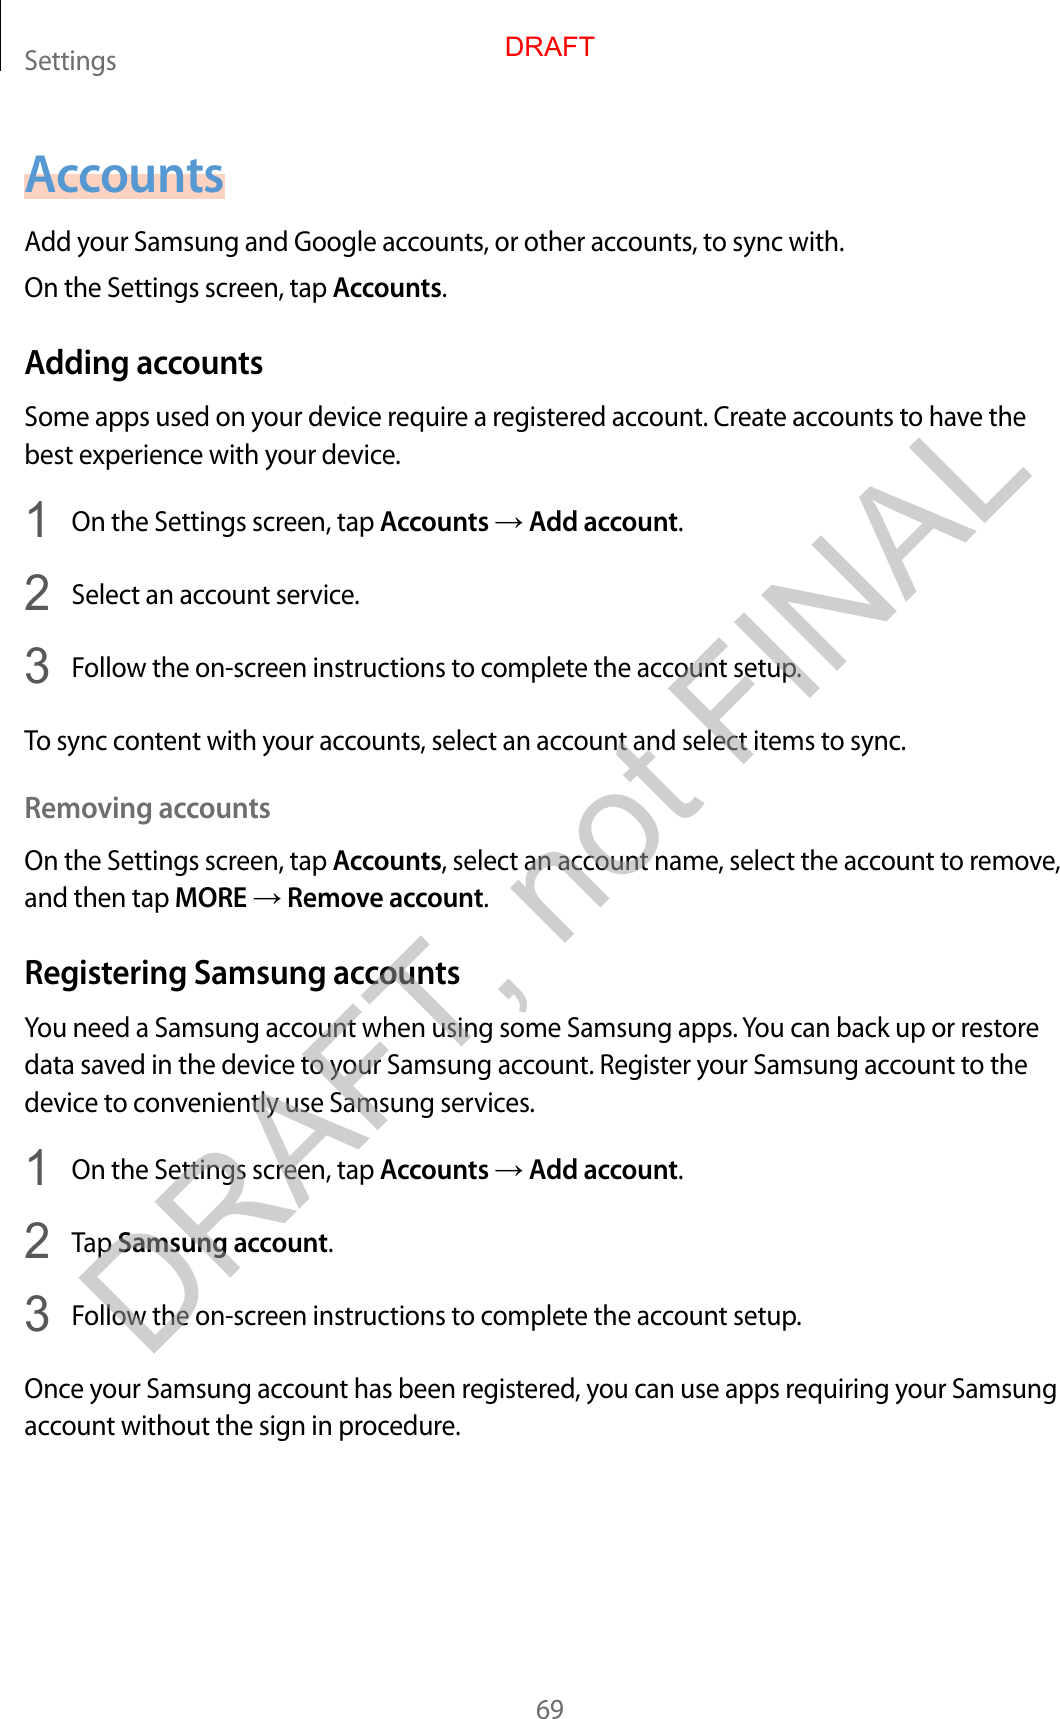 Settings69AccountsAdd y our Samsung and Google accoun ts , or other acc ounts, to sync with.On the Settings screen, tap Accounts.Adding ac c oun tsSome apps used on your device r equir e a r egist er ed ac coun t. Cr ea te ac coun ts to ha v e the best experience with your devic e .1  On the Settings screen, tap Accounts → Add ac c ount.2  Select an accoun t service.3  Follow the on-screen instructions to complete the ac coun t setup.To sync conten t with y our acc ounts , select an accoun t and select items to sync .Removing acc oun tsOn the Settings screen, tap Accounts, select an account name, select the accoun t to r emo v e , and then tap MORE → Remov e acc oun t.Registering Samsung acc ountsYou need a Samsung account when using some Samsung apps. You can back up or restore data sav ed in the devic e to y our Samsung acc ount . Regist er y our Samsung accoun t to the device to c on v eniently use Samsung services.1  On the Settings screen, tap Accounts → Add ac c ount.2  Tap Samsung account.3  Follow the on-screen instructions to complete the ac coun t setup.Once your Samsung ac coun t has been r egist er ed , y ou can use apps r equiring your Samsung account without the sig n in pr oc edur e .DRAFT, not FINALDRAFT